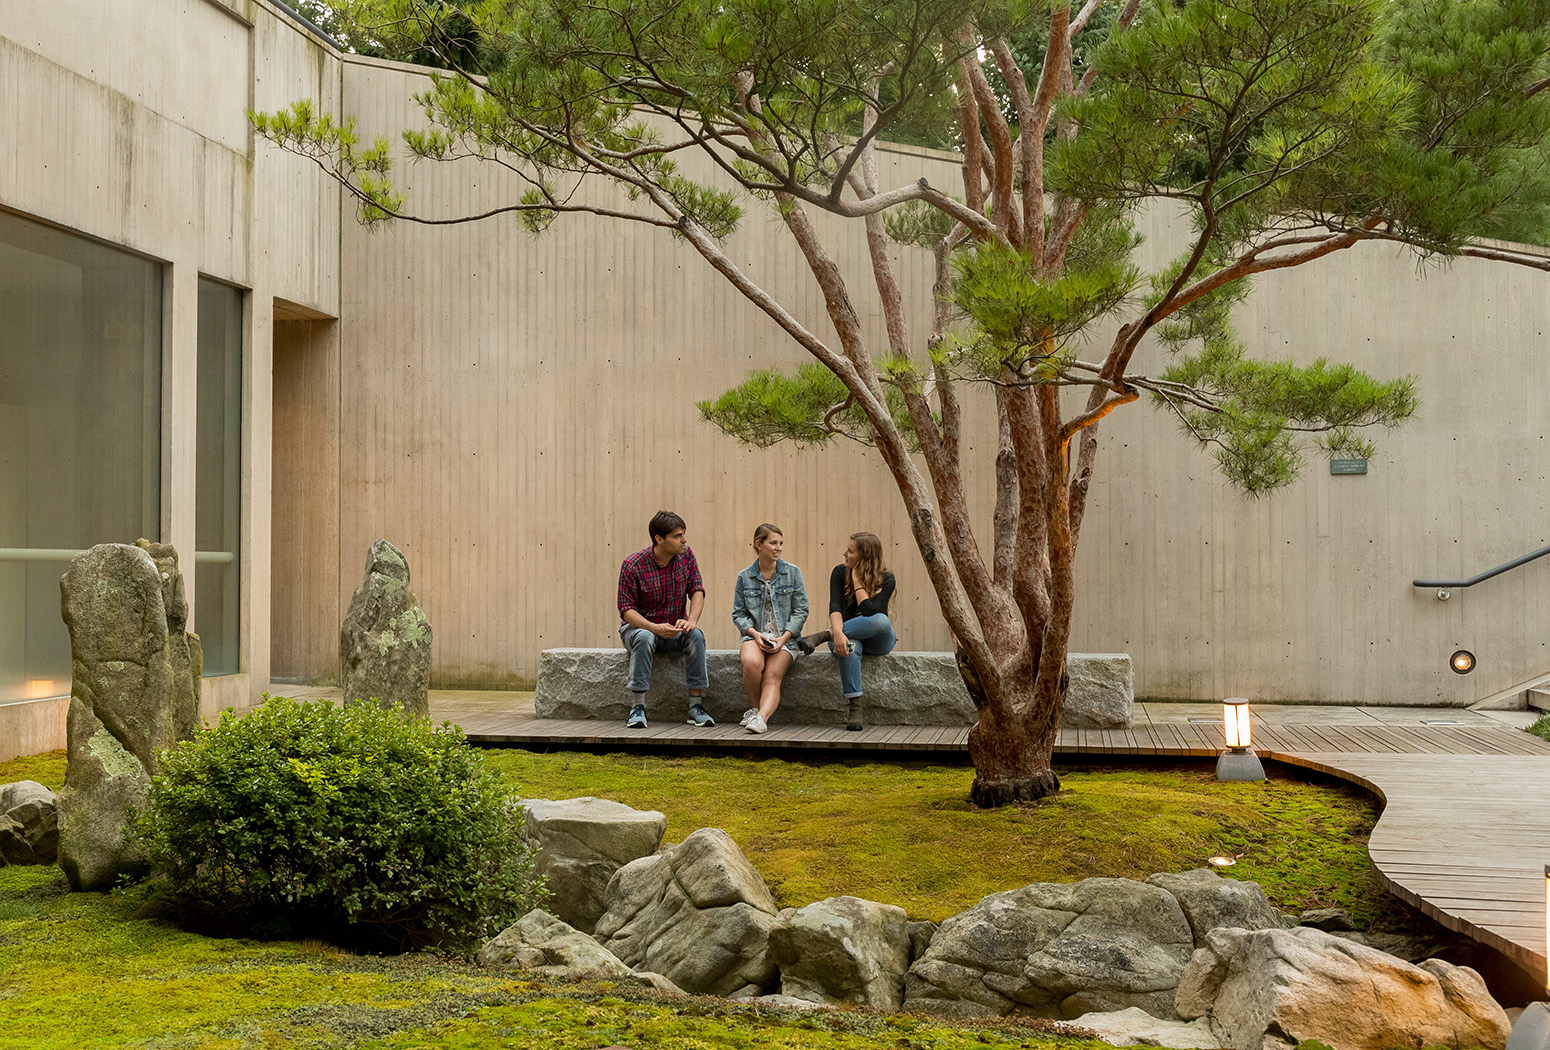 Three people sit on a stone bench overlooking a Japanese garden with moss, stones, and a large tree